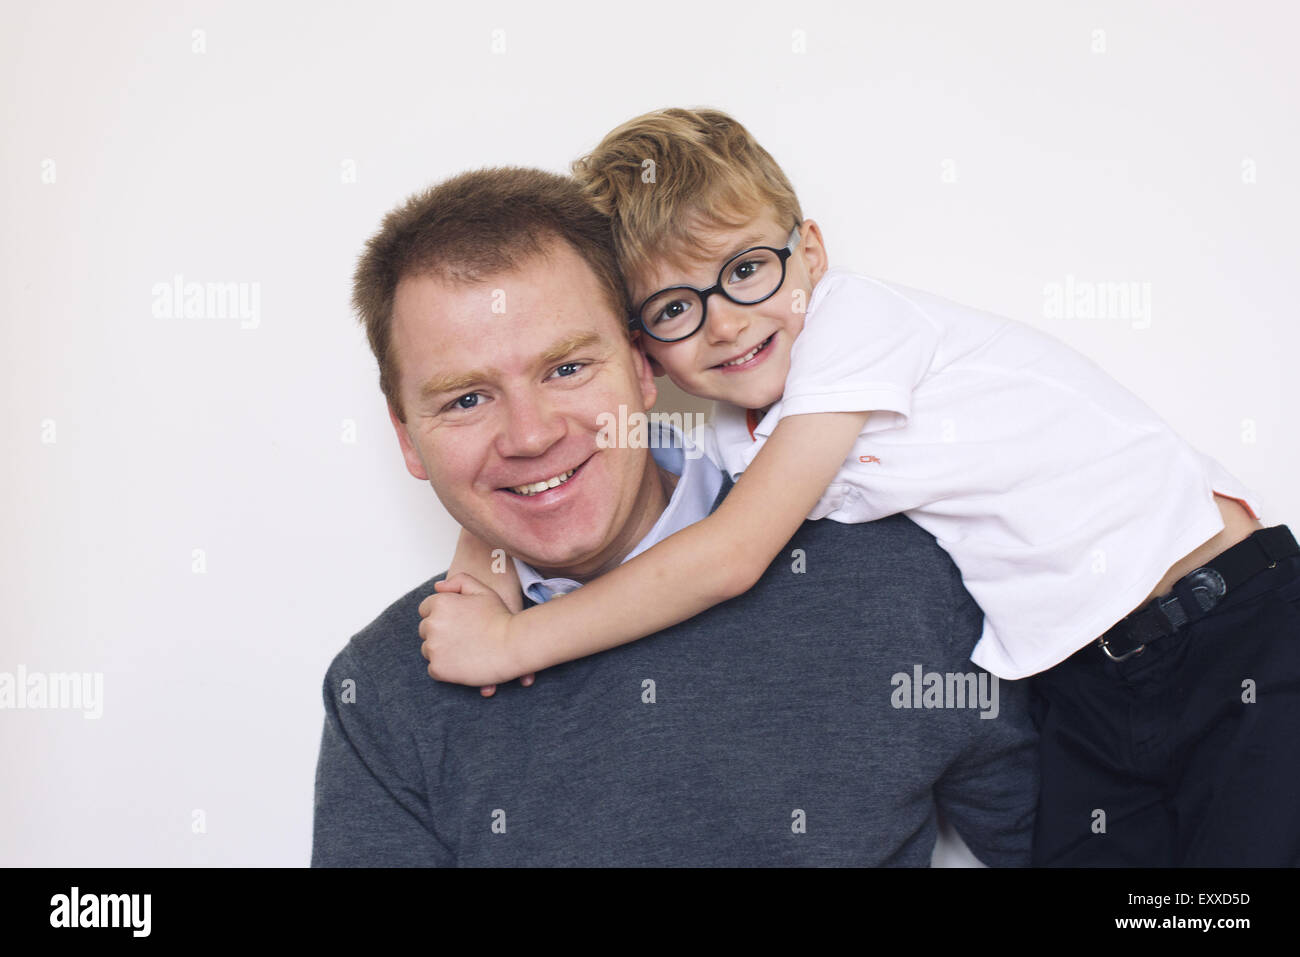 Father and son, portrait Stock Photo